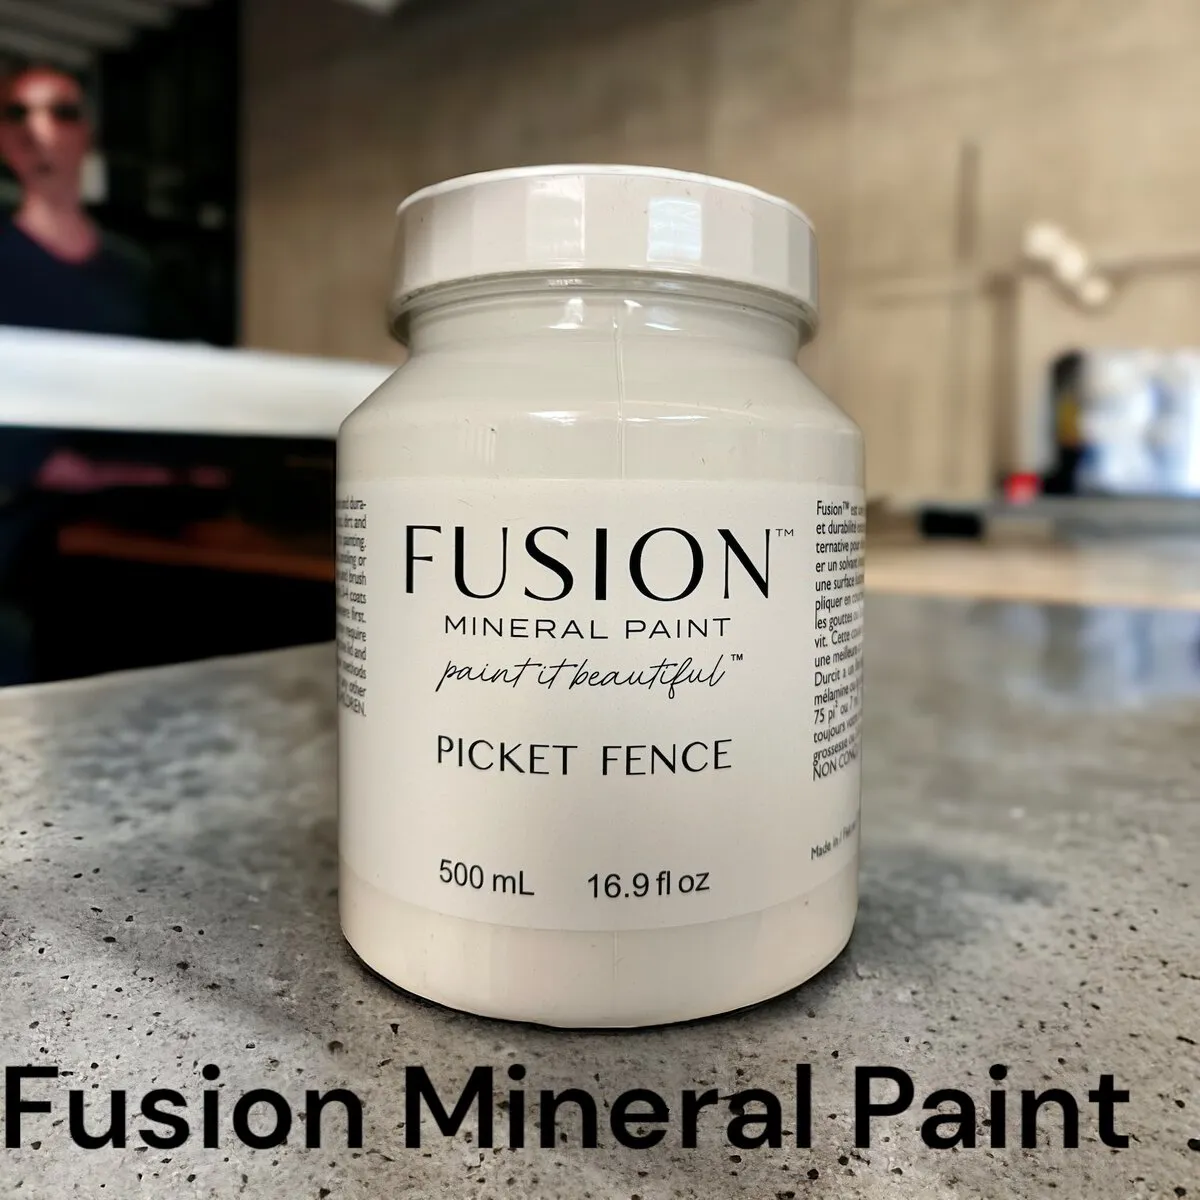 Fusion Mineral Paint Product